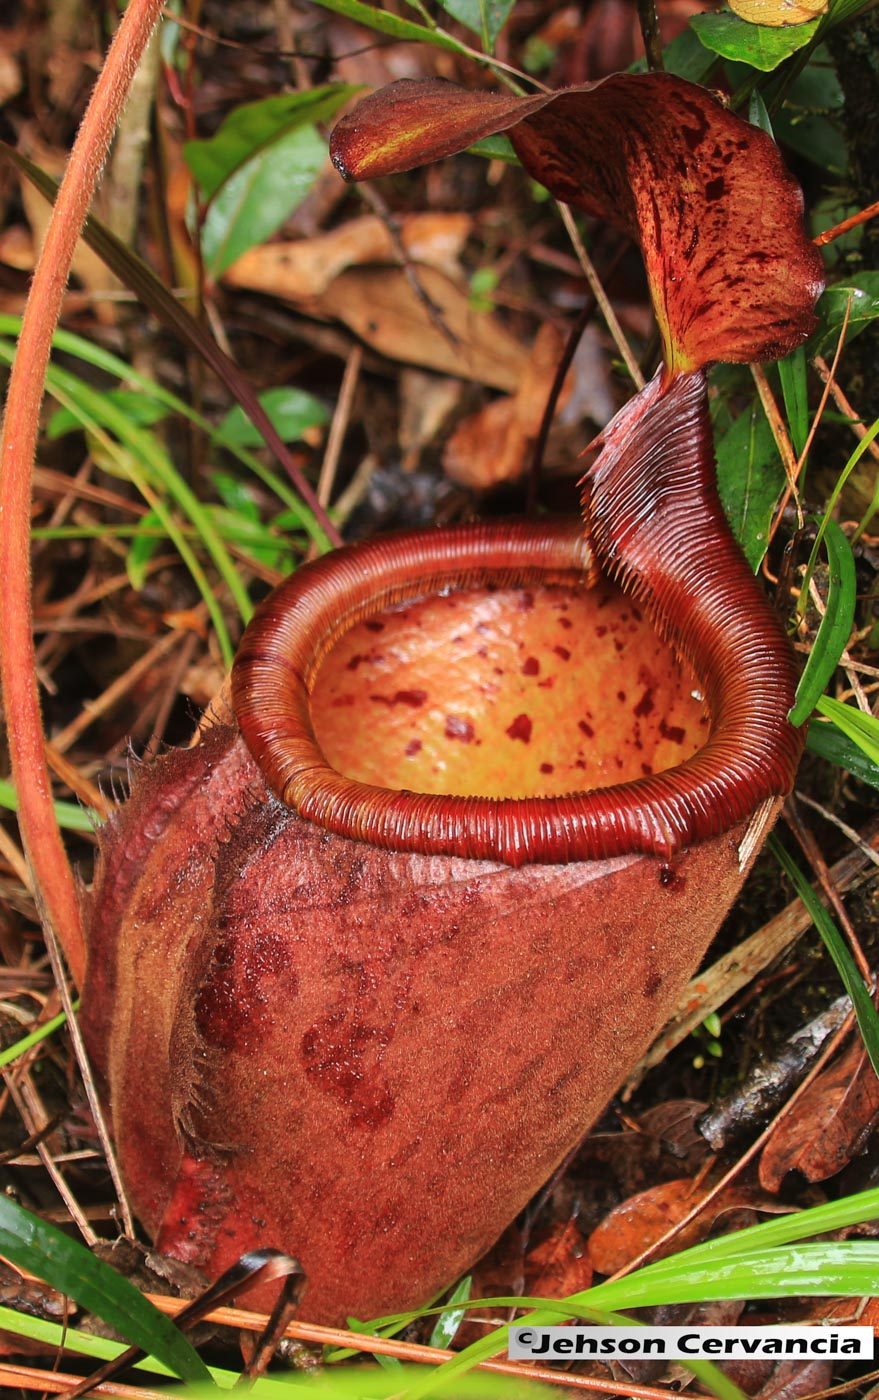 UNIQUE FLORA. Nepenthes palawanensis, an endemic pitcher plant species, grows in abundance along the trail to Sultan Peak. Photo courtesy of Jehson Cervancia/Narra Municipal Tourism Office 